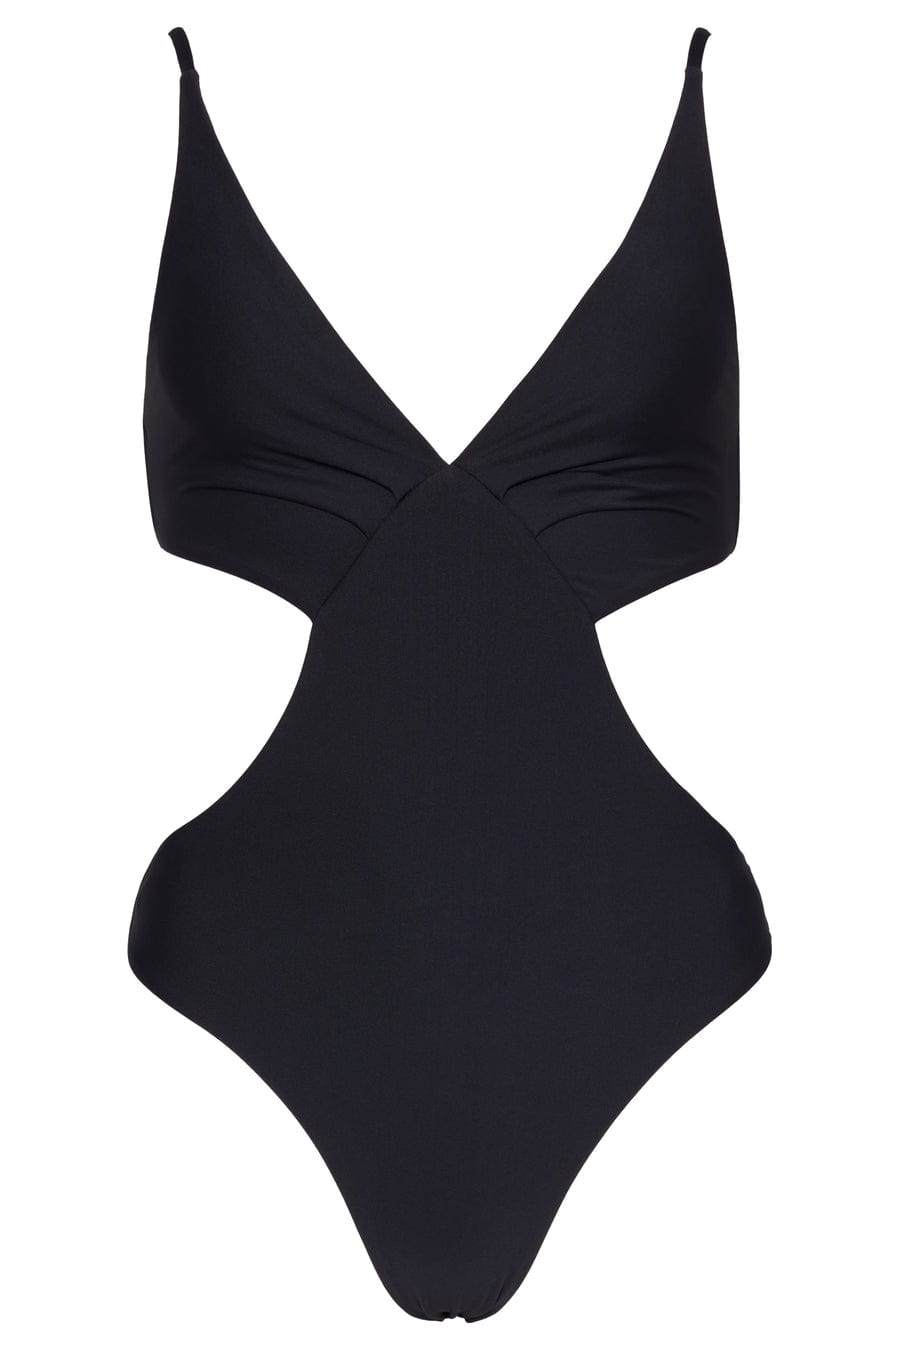 Cut Out Plunge One Piece* - Monte and Lou - Splash Swimwear  - July22, Monte & Lou, One Pieces - Splash Swimwear 